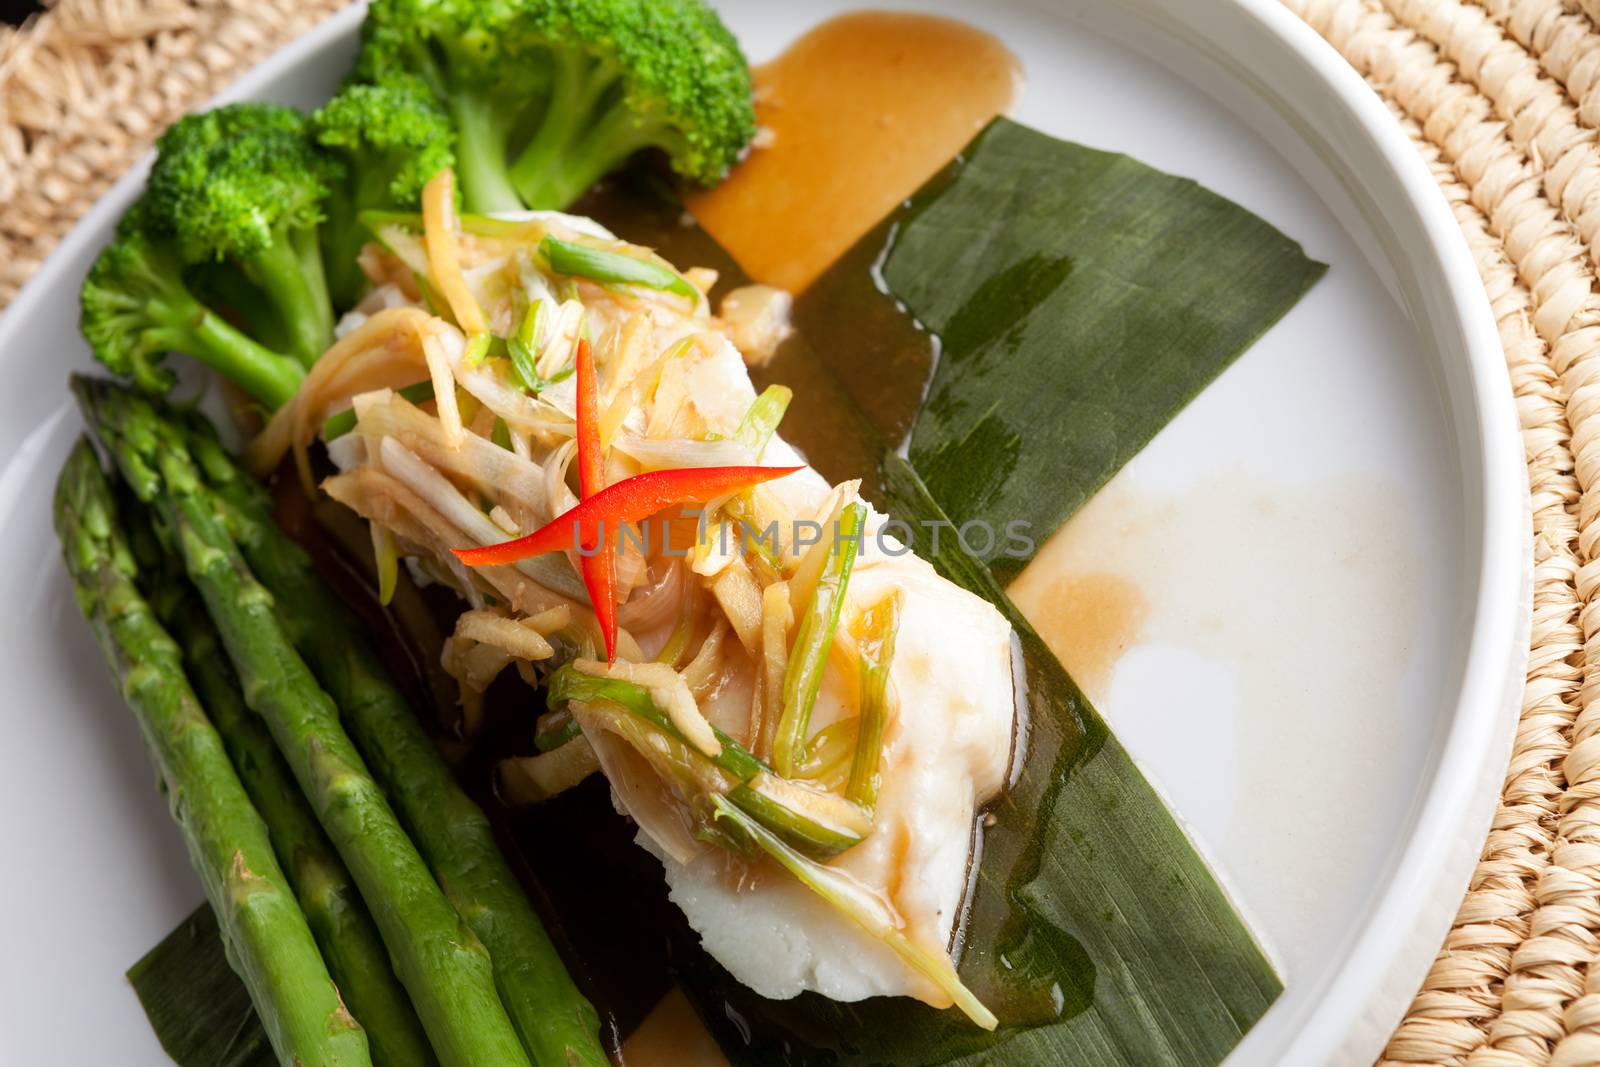 Freshly prepared Thai style sea bass fish dinner with asparagus and appetizer with a contemporary presentation.